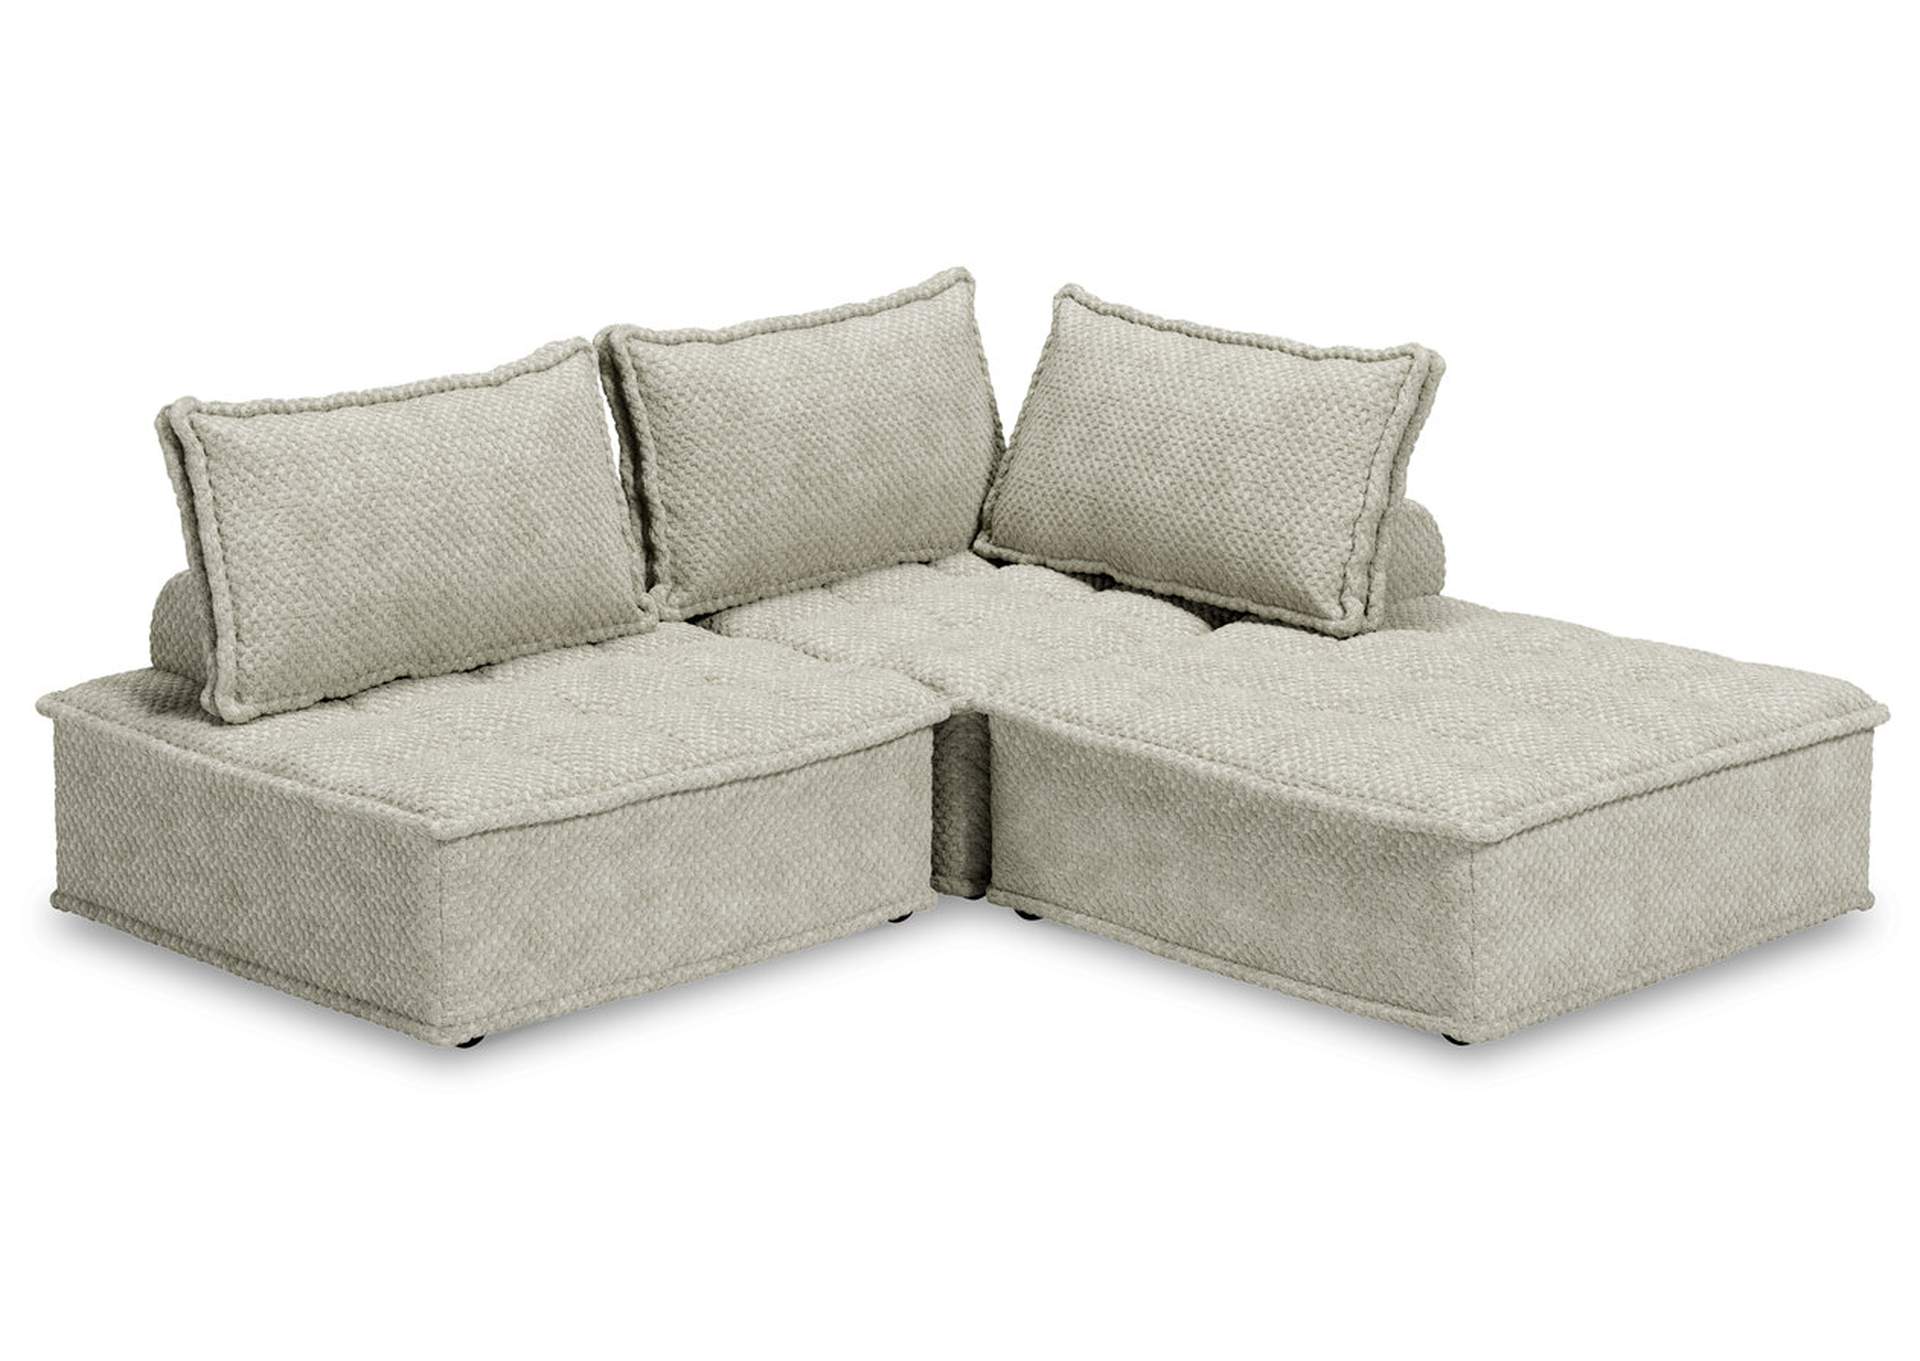 Bales 3-Piece Modular Seating,Signature Design By Ashley